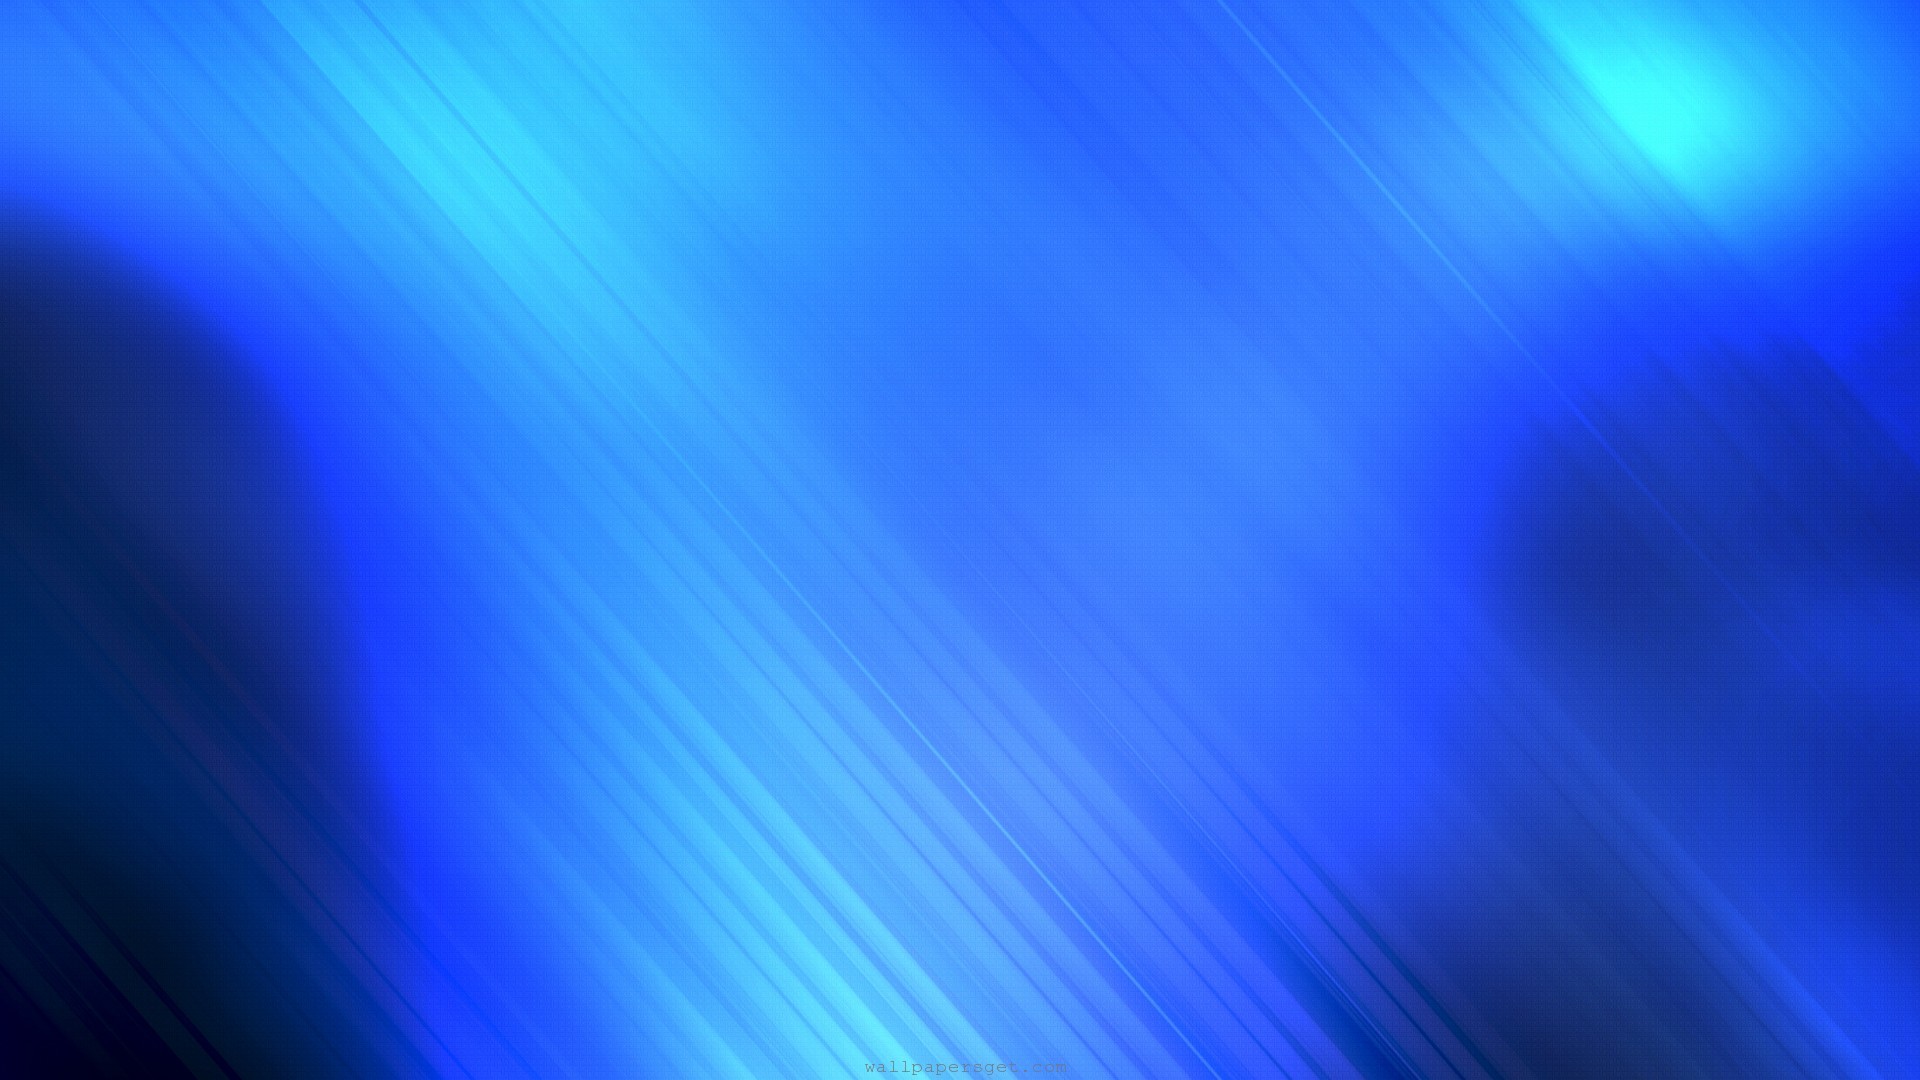 Blue Abstract Background 2042 Hd Wallpapers in Abstract – Imagesci.com Screen Savers Pinterest Blue wallpapers and Wallpaper